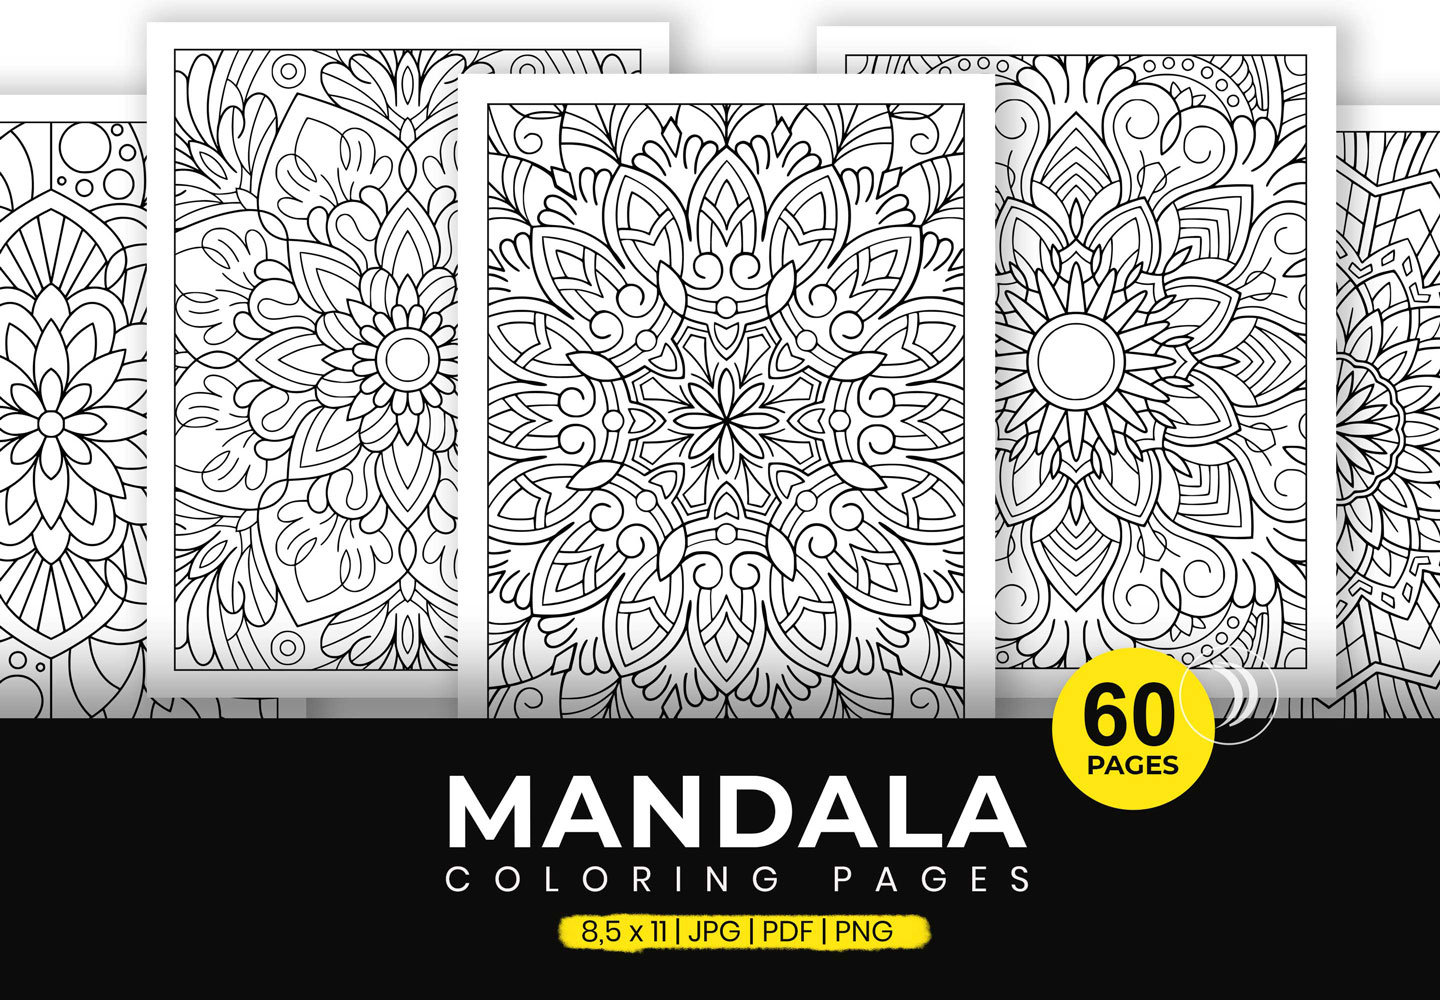 mandala coloring page for adult 01